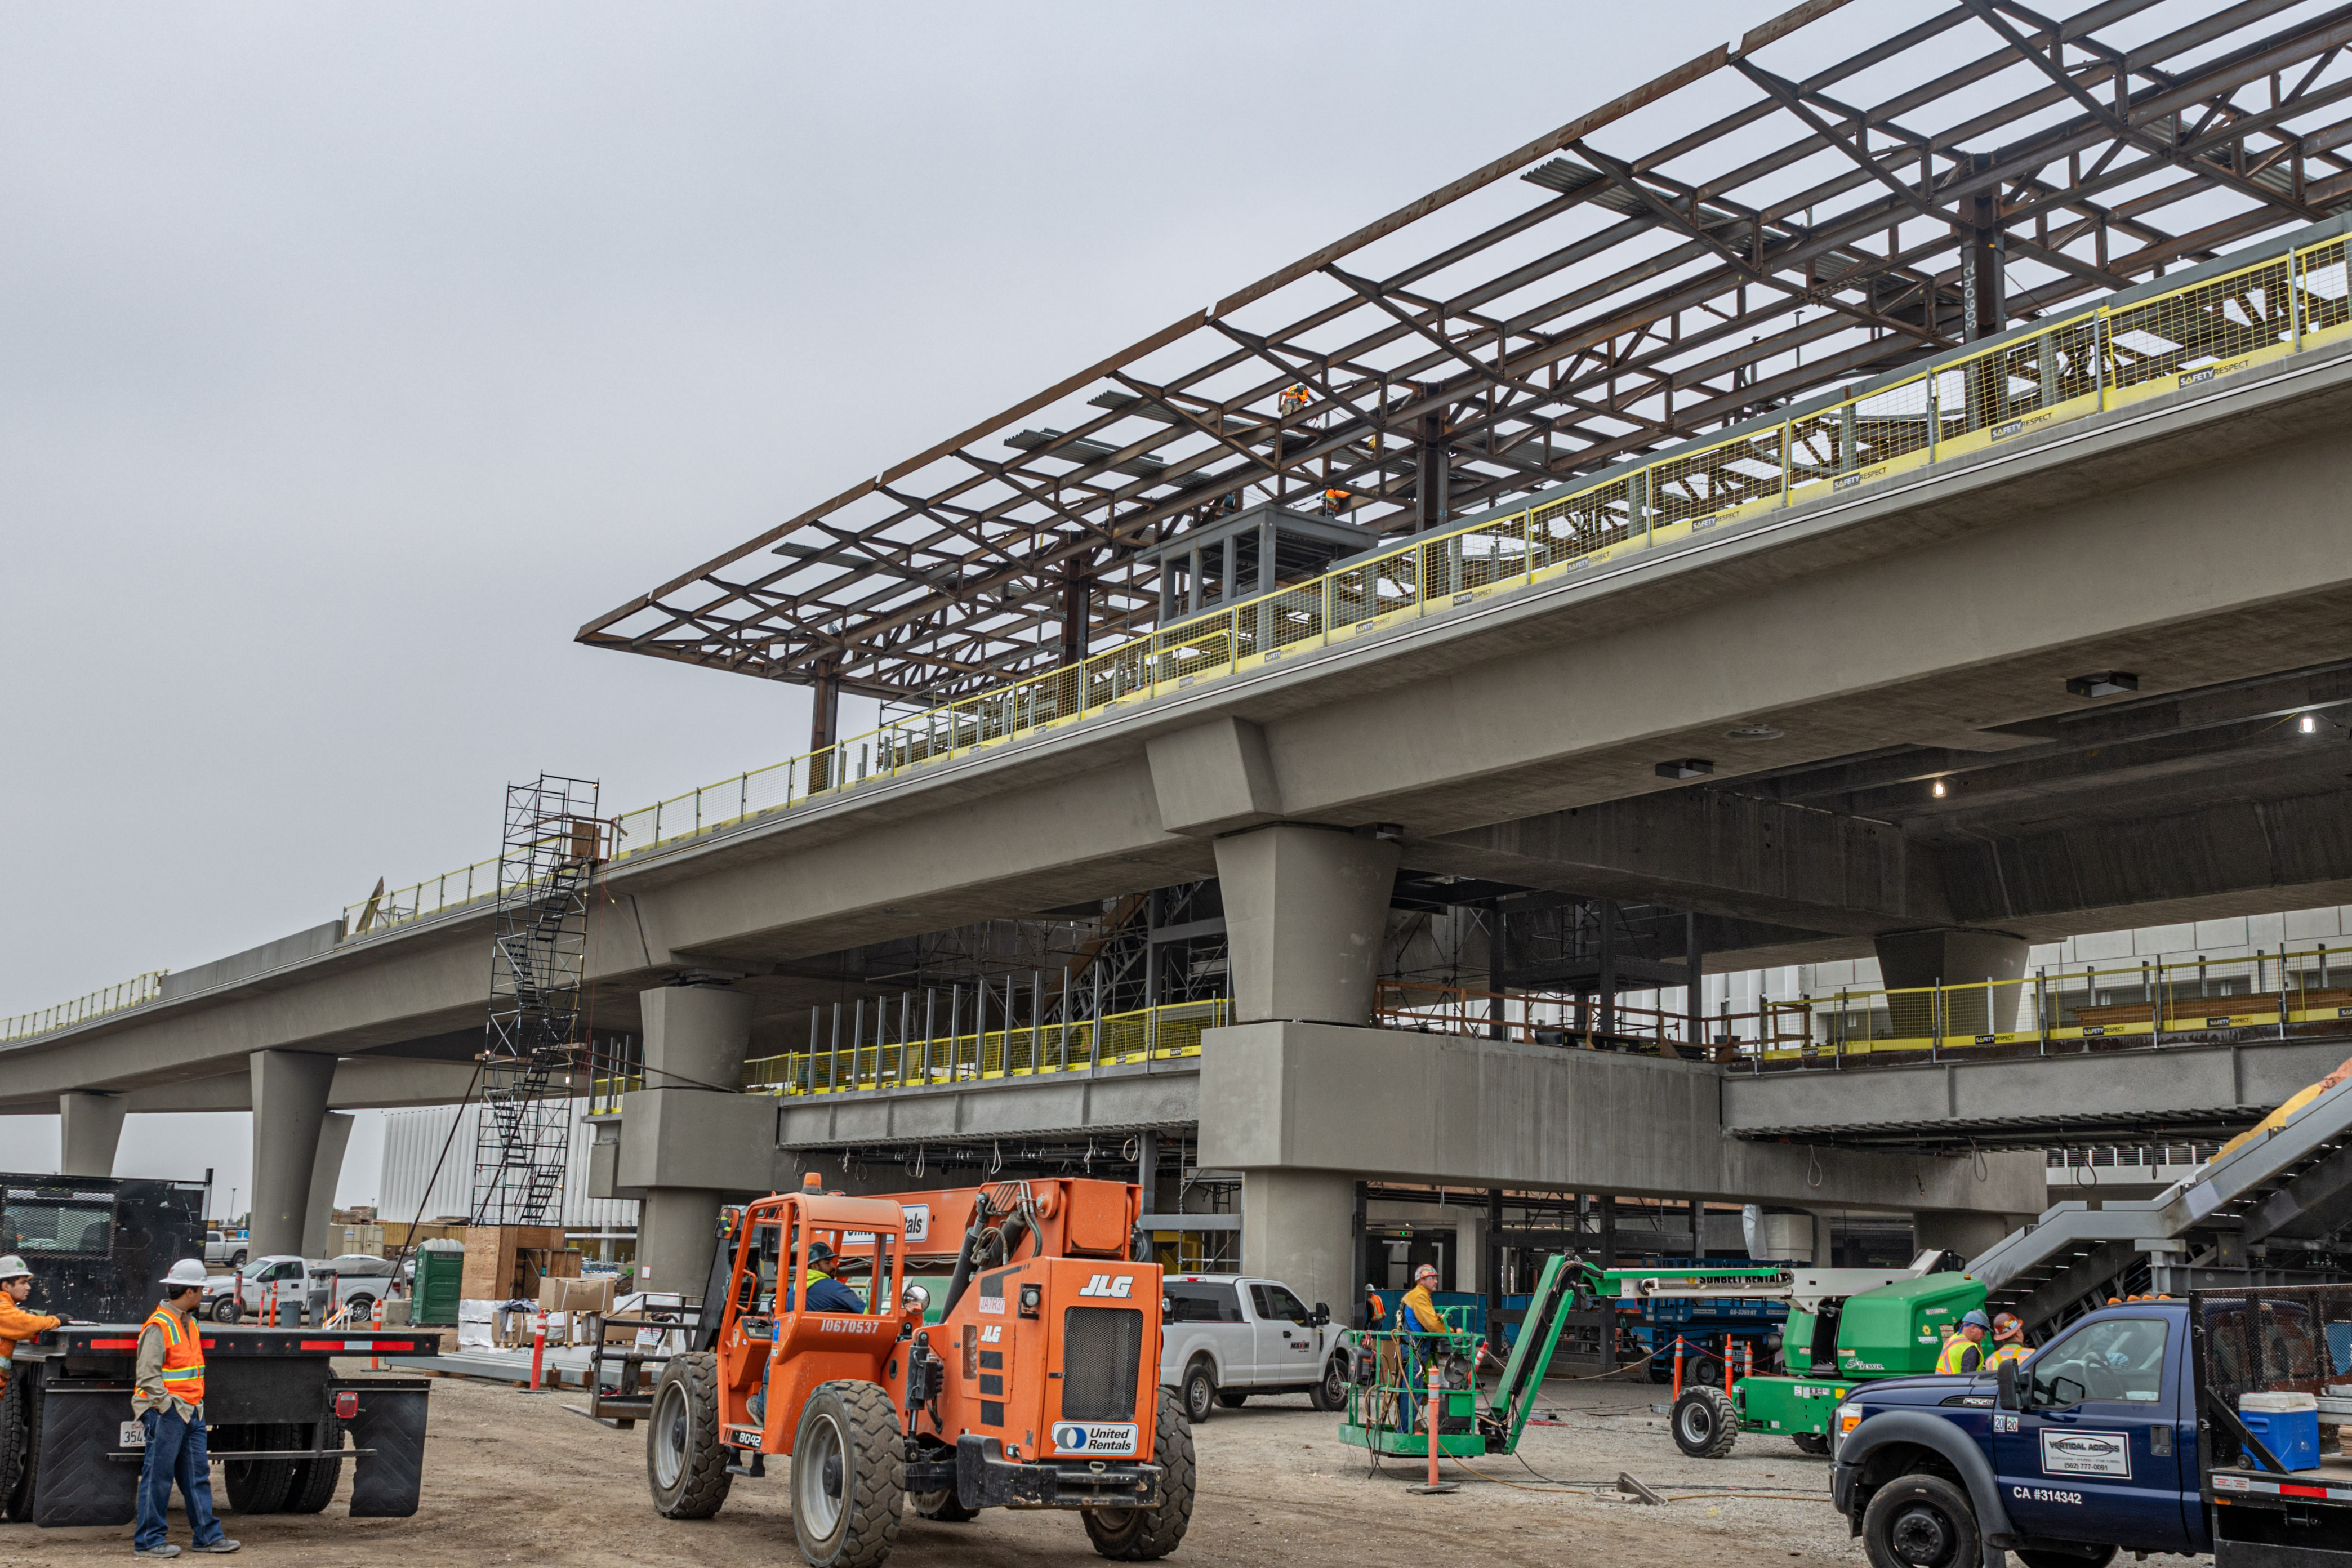 Work continues after the topping out of structural steel at the Intermodal Transportation Facility-West Station.